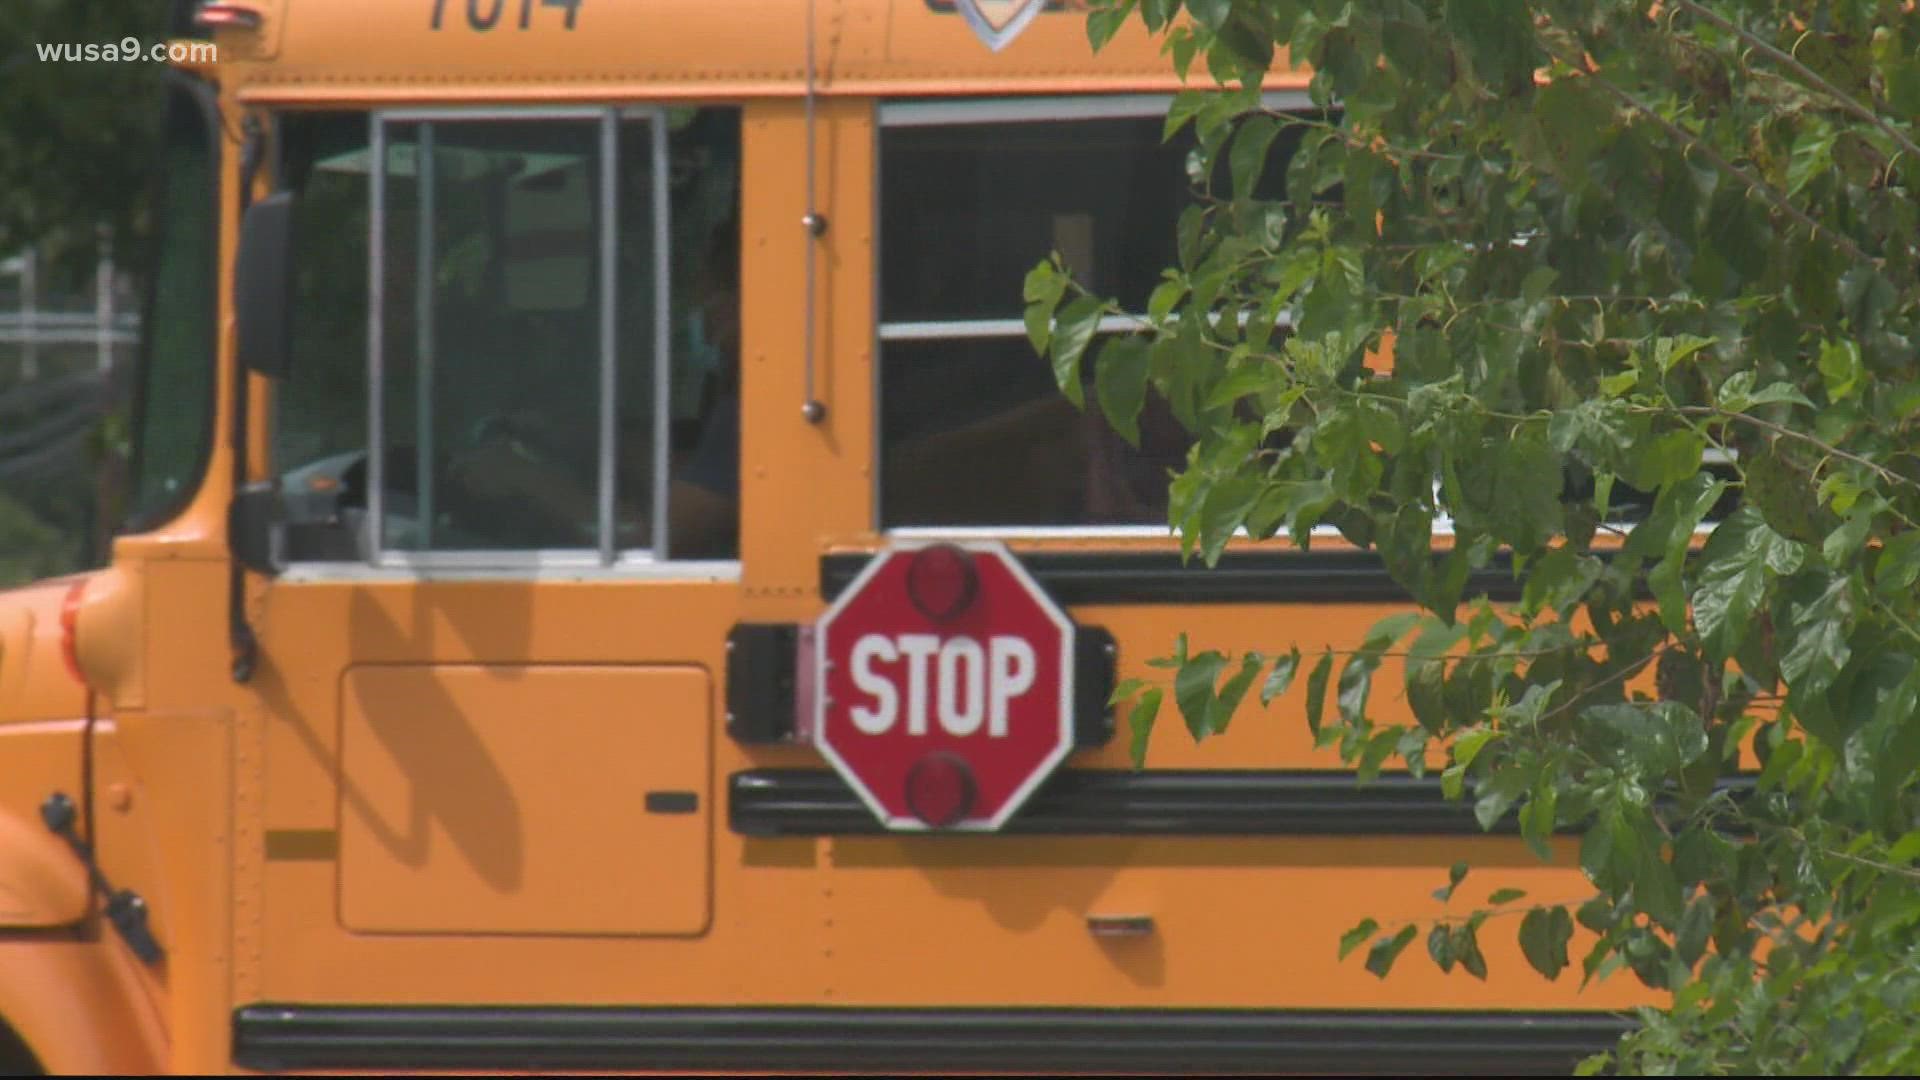 One Clinton parent told WUSA9 no school bus came to pick up her son at his school bus stop Wednesday.